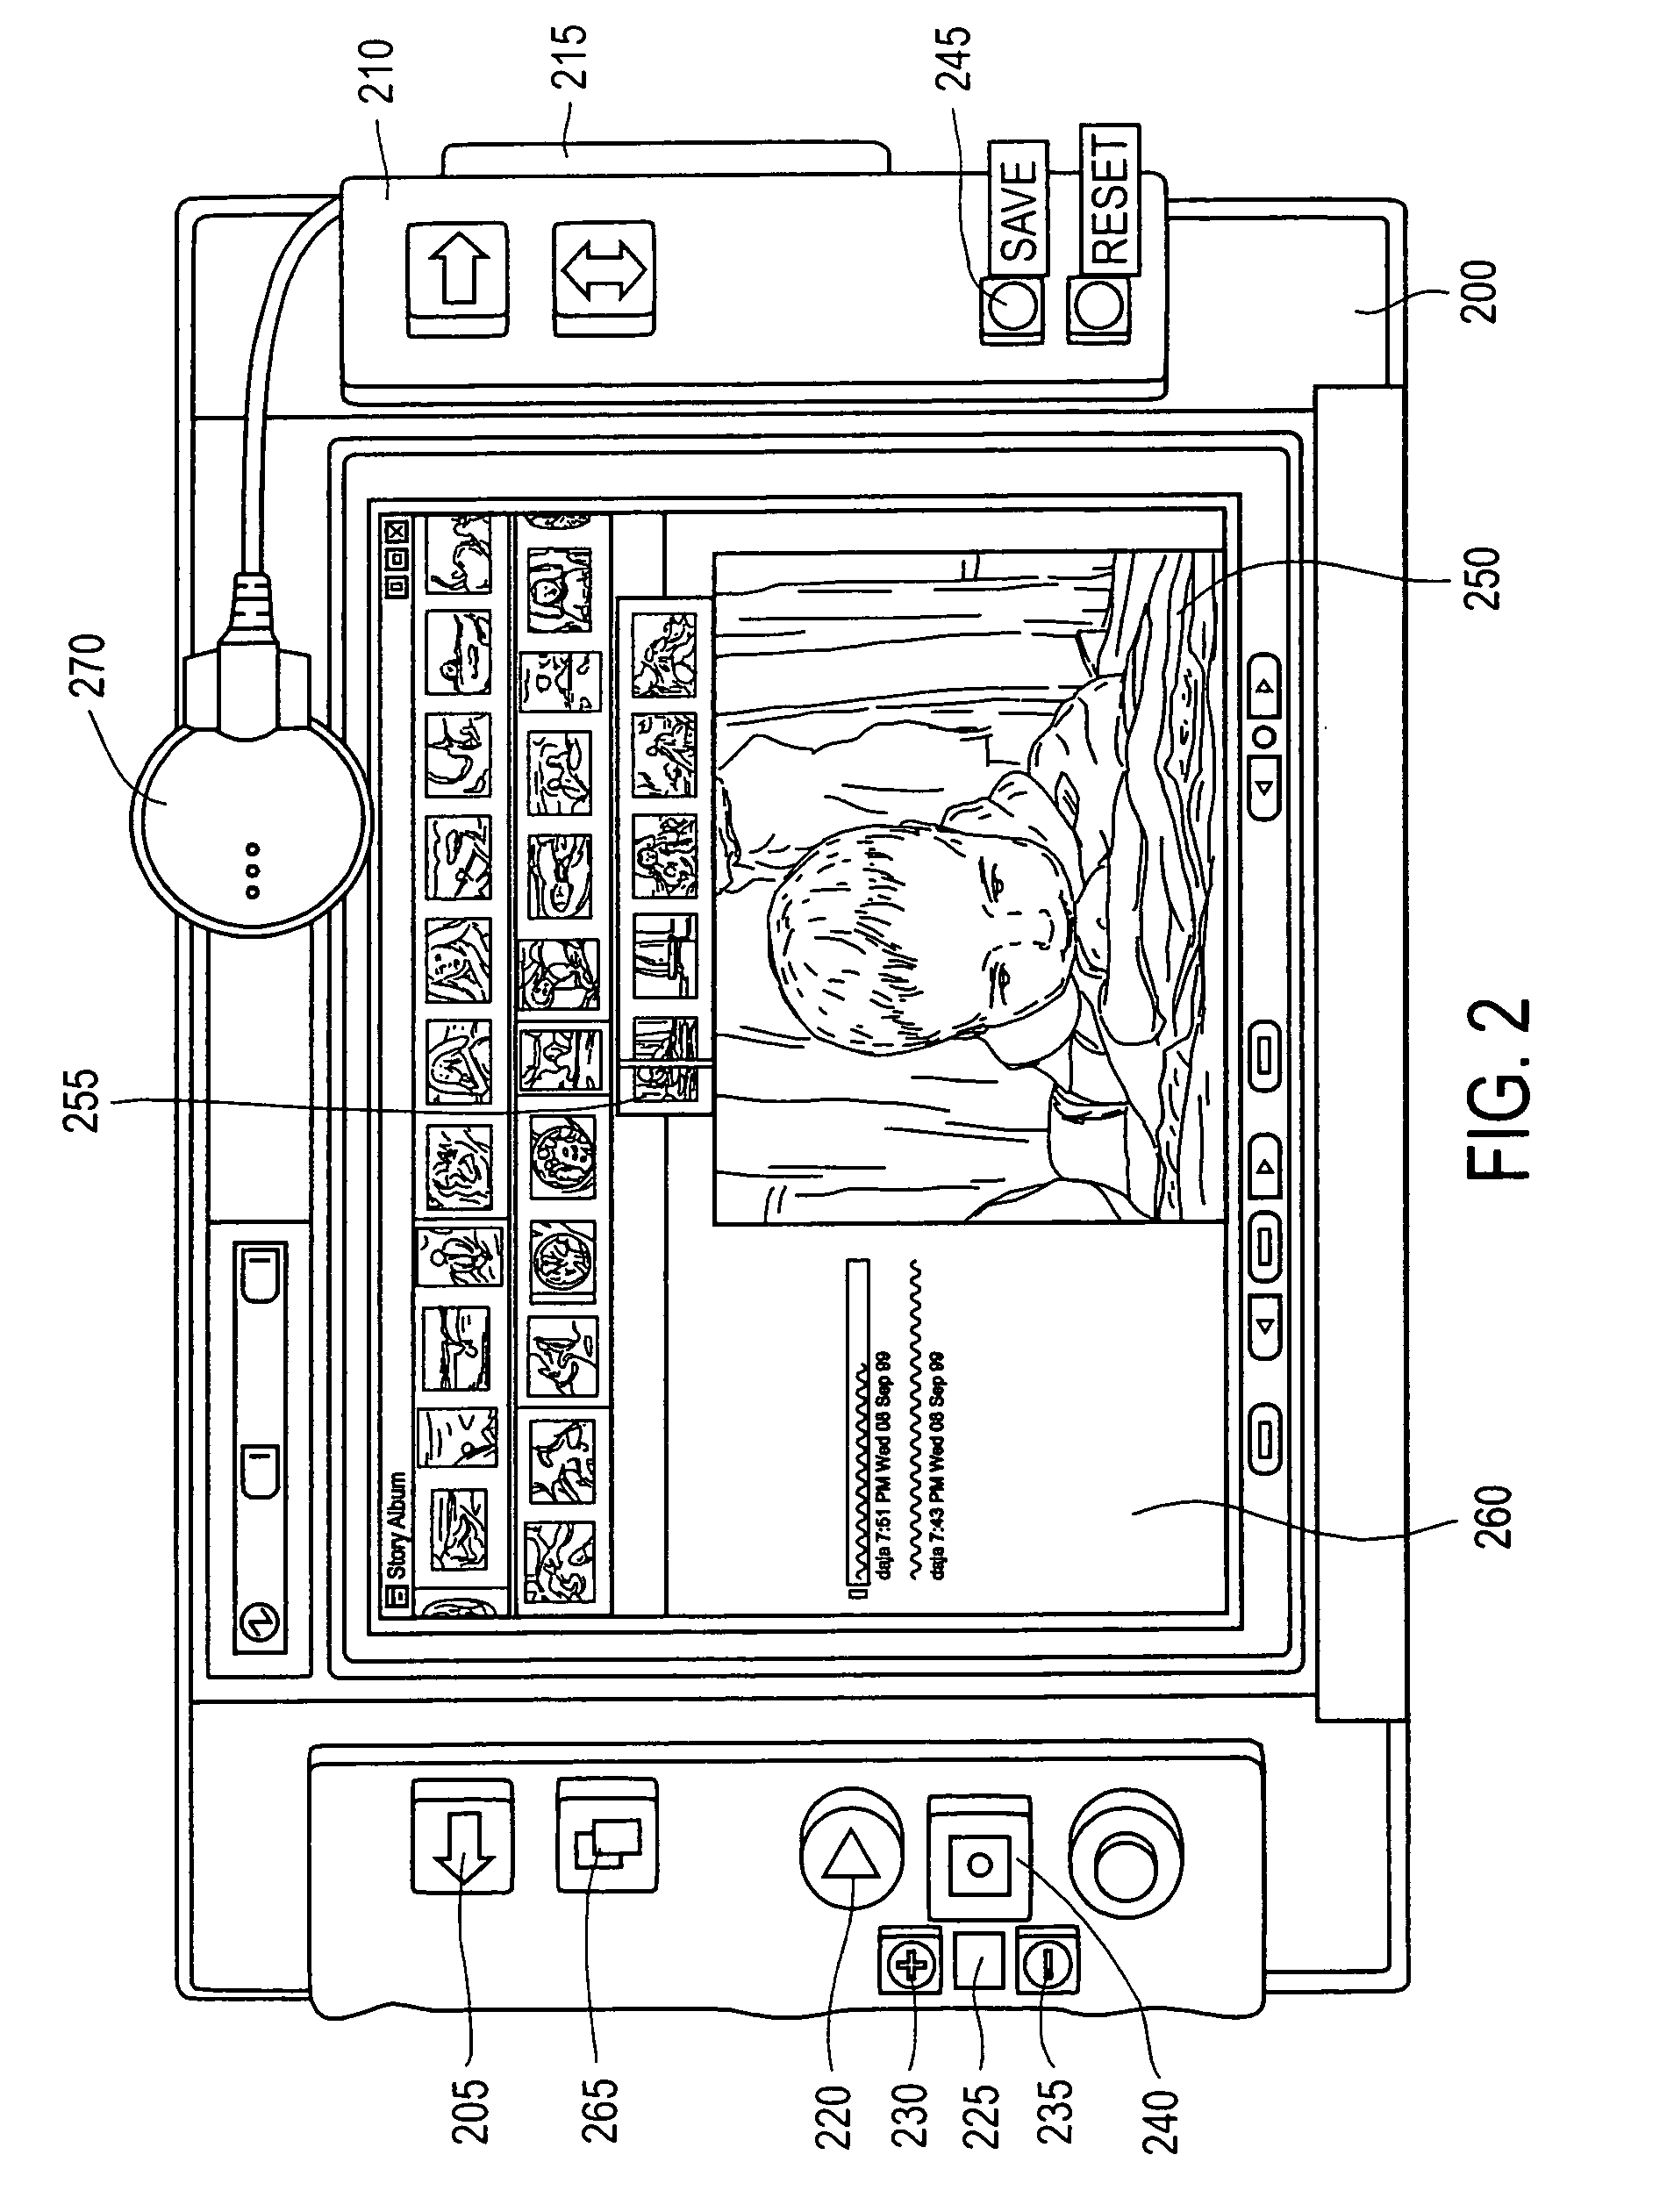 Method and apparatus for storytelling with digital photographs